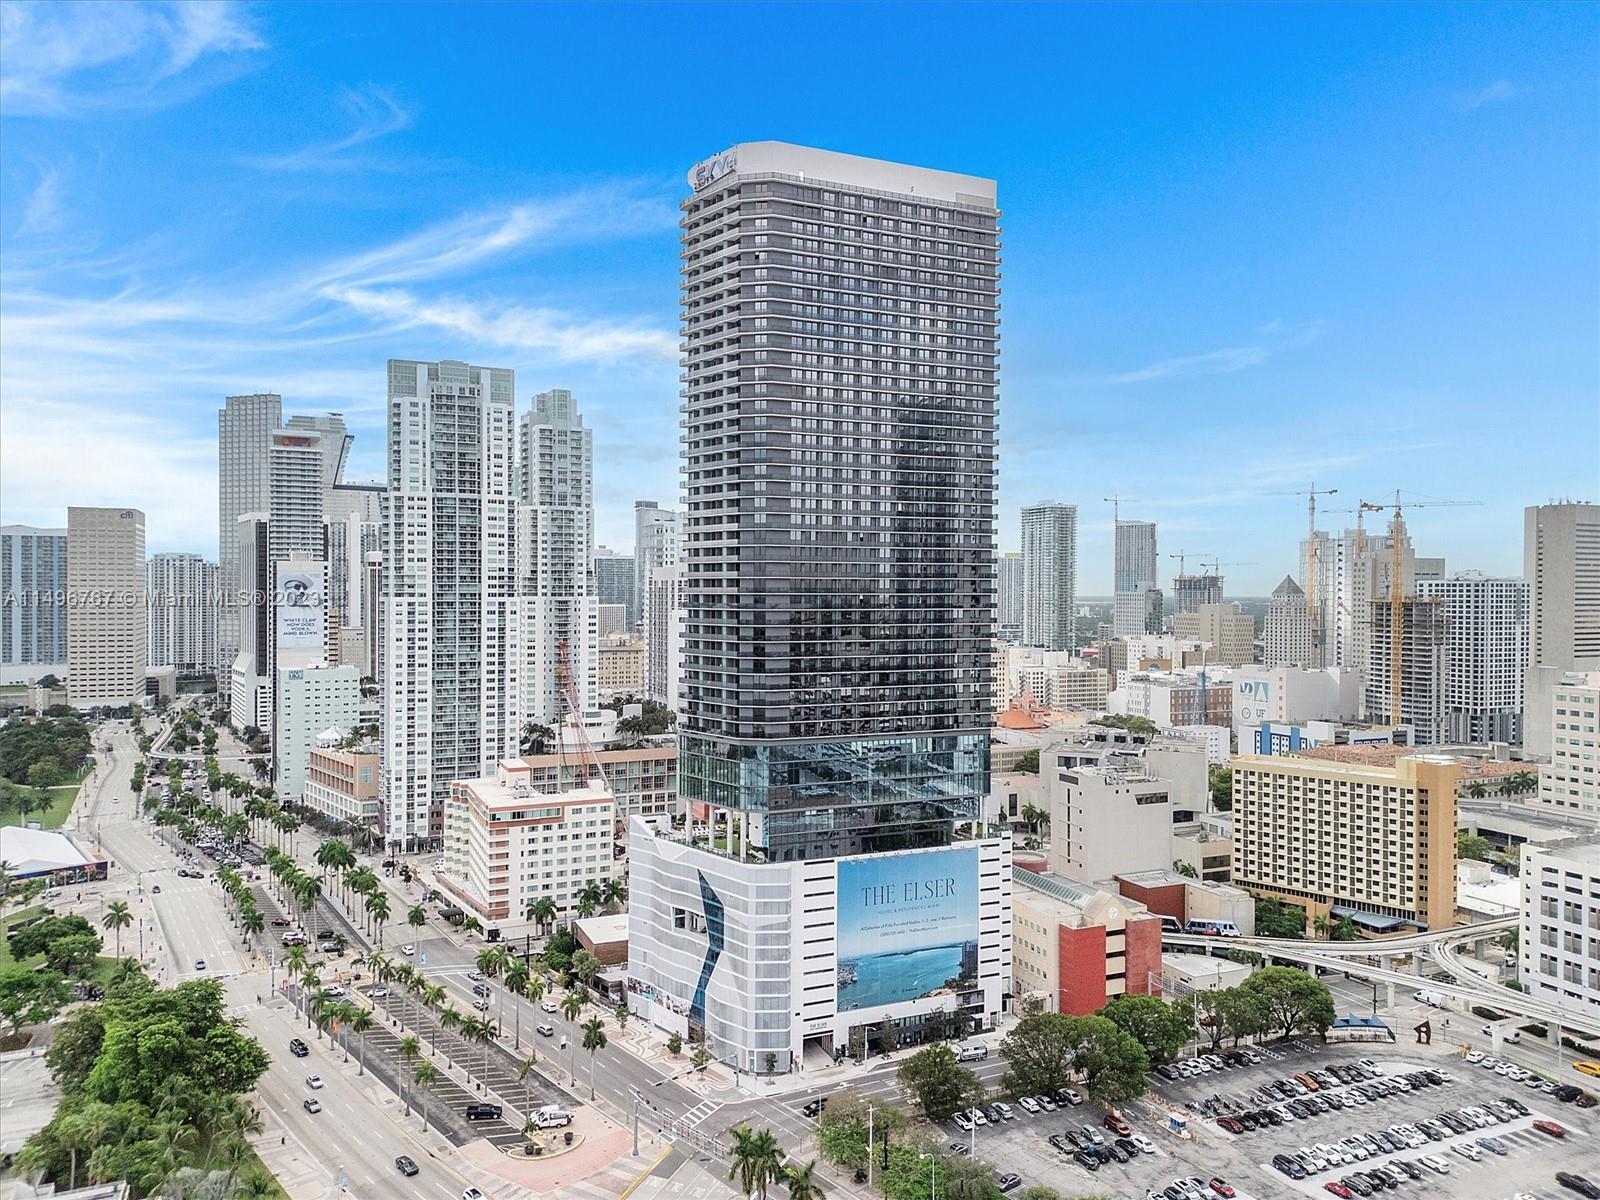 Experience Miami's pinnacle of luxury living at The Elser Hotel and Residences. This 1-bed, 1-bath r